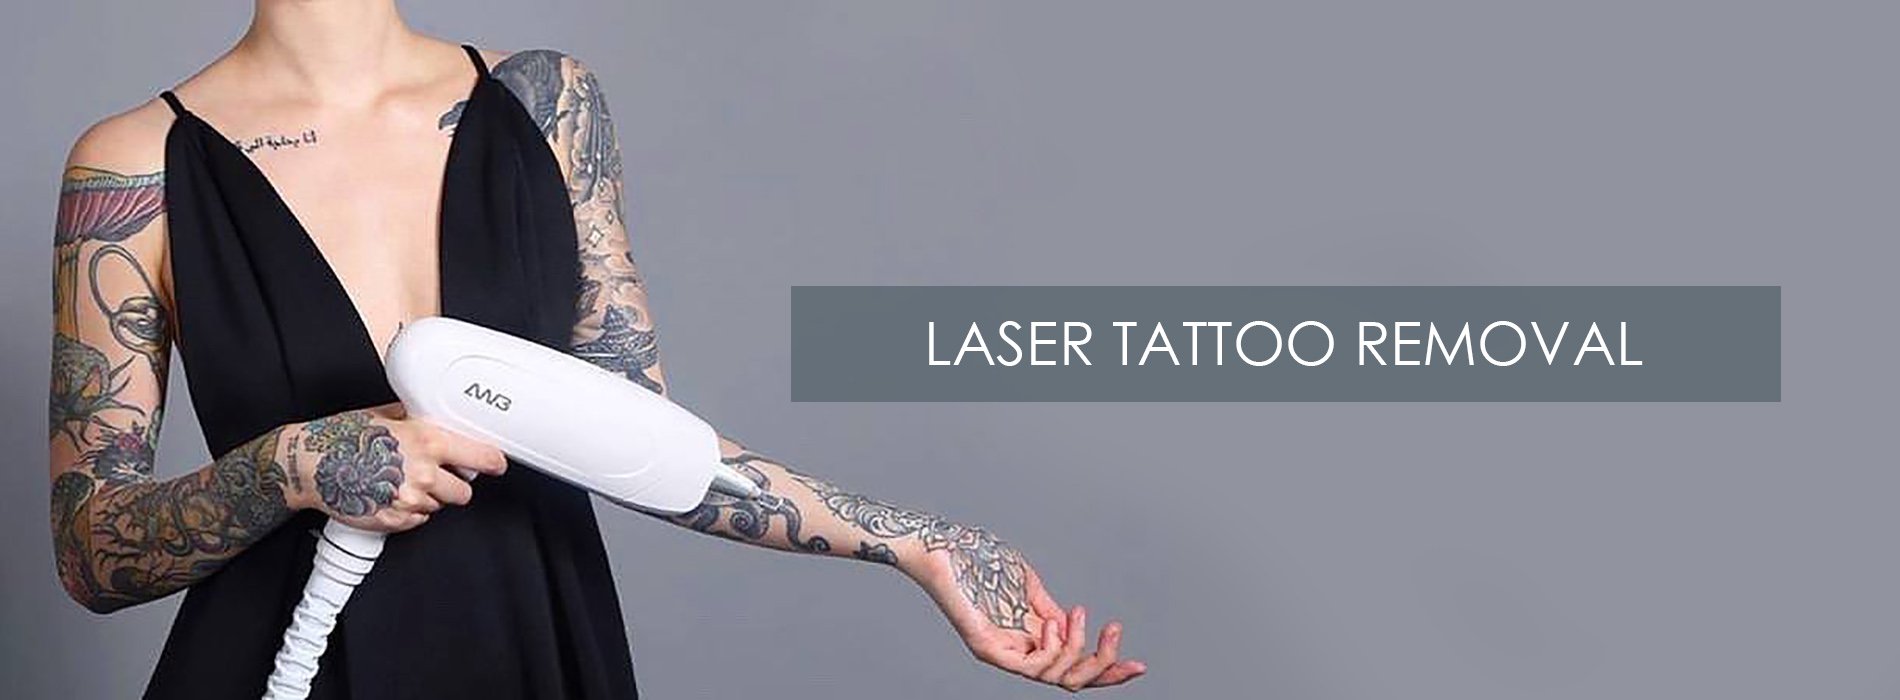 Laser Tattoo Removal at Dunstable Aesthetics Clinic